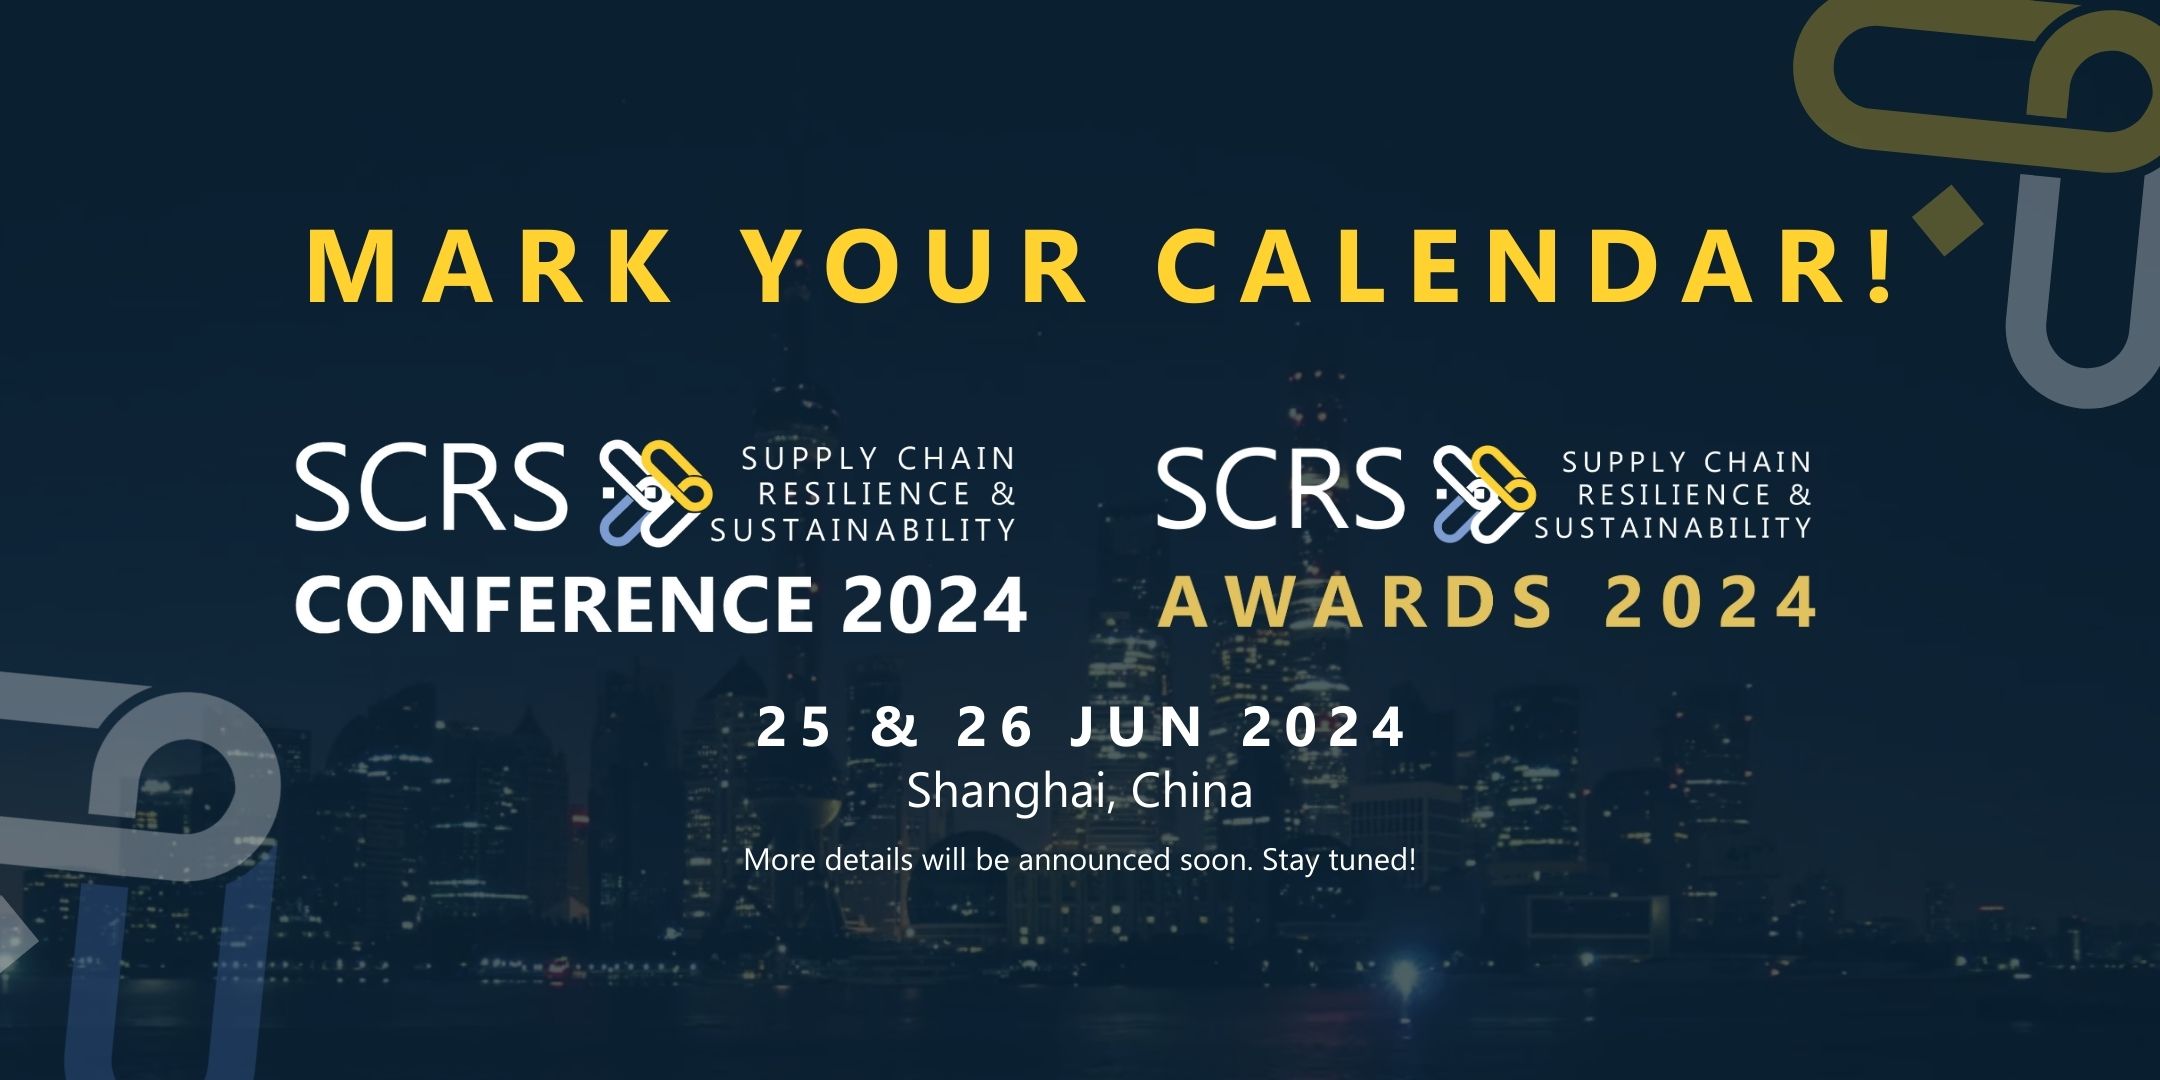 SCRS Conference and Awards, Pudong Qiantan Area, Shanghai, China